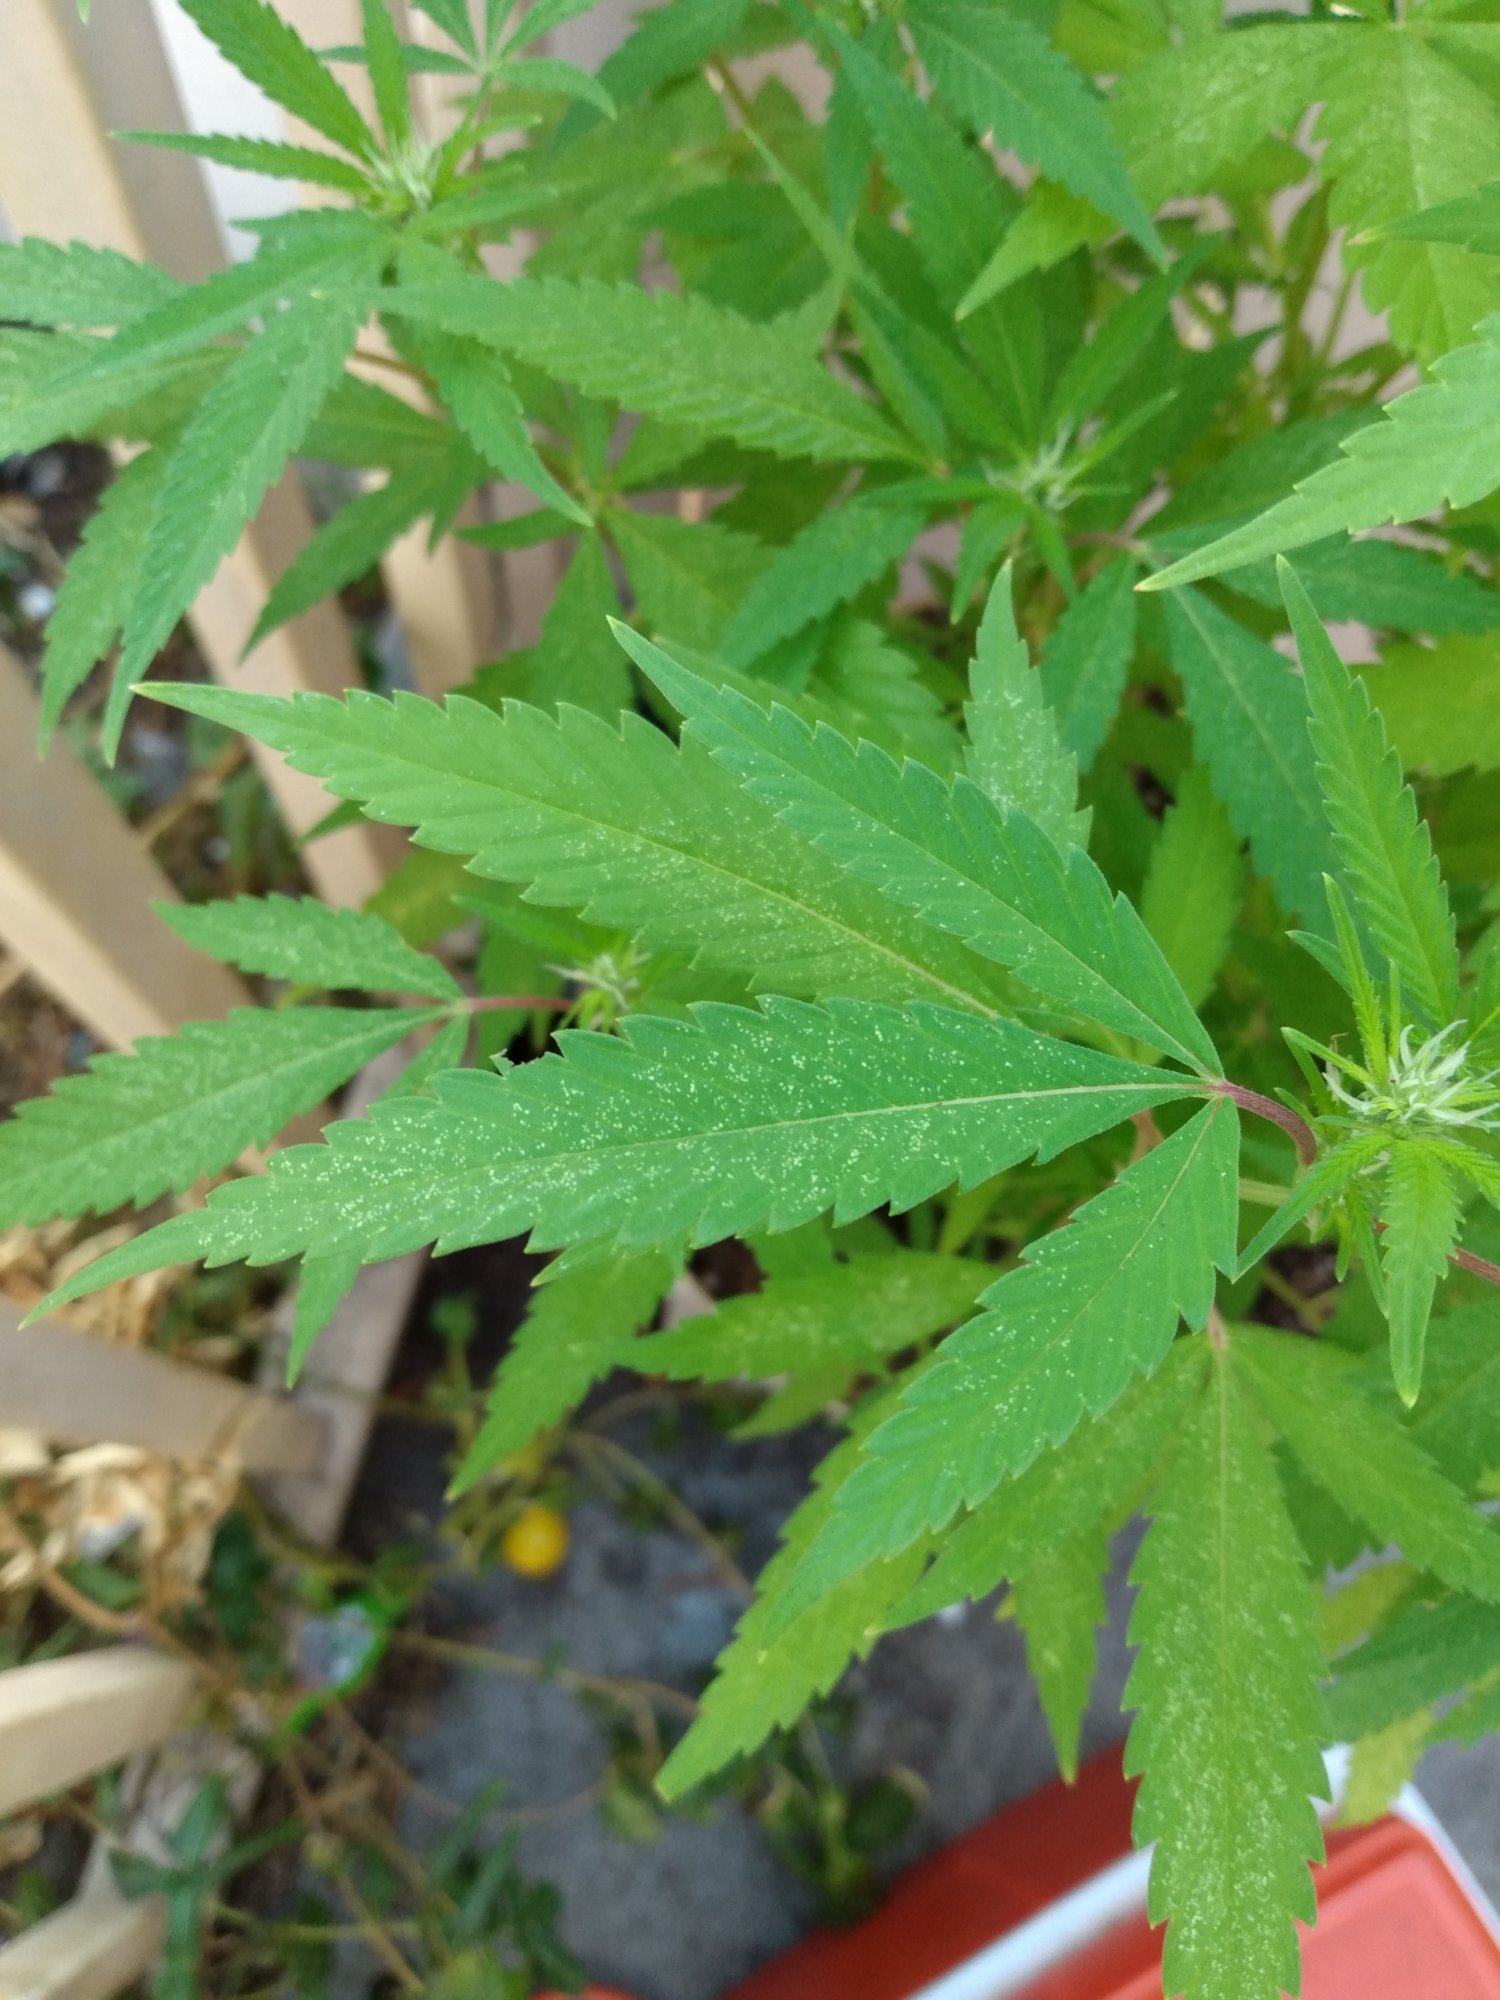 White powder on my leaves does not wipe off